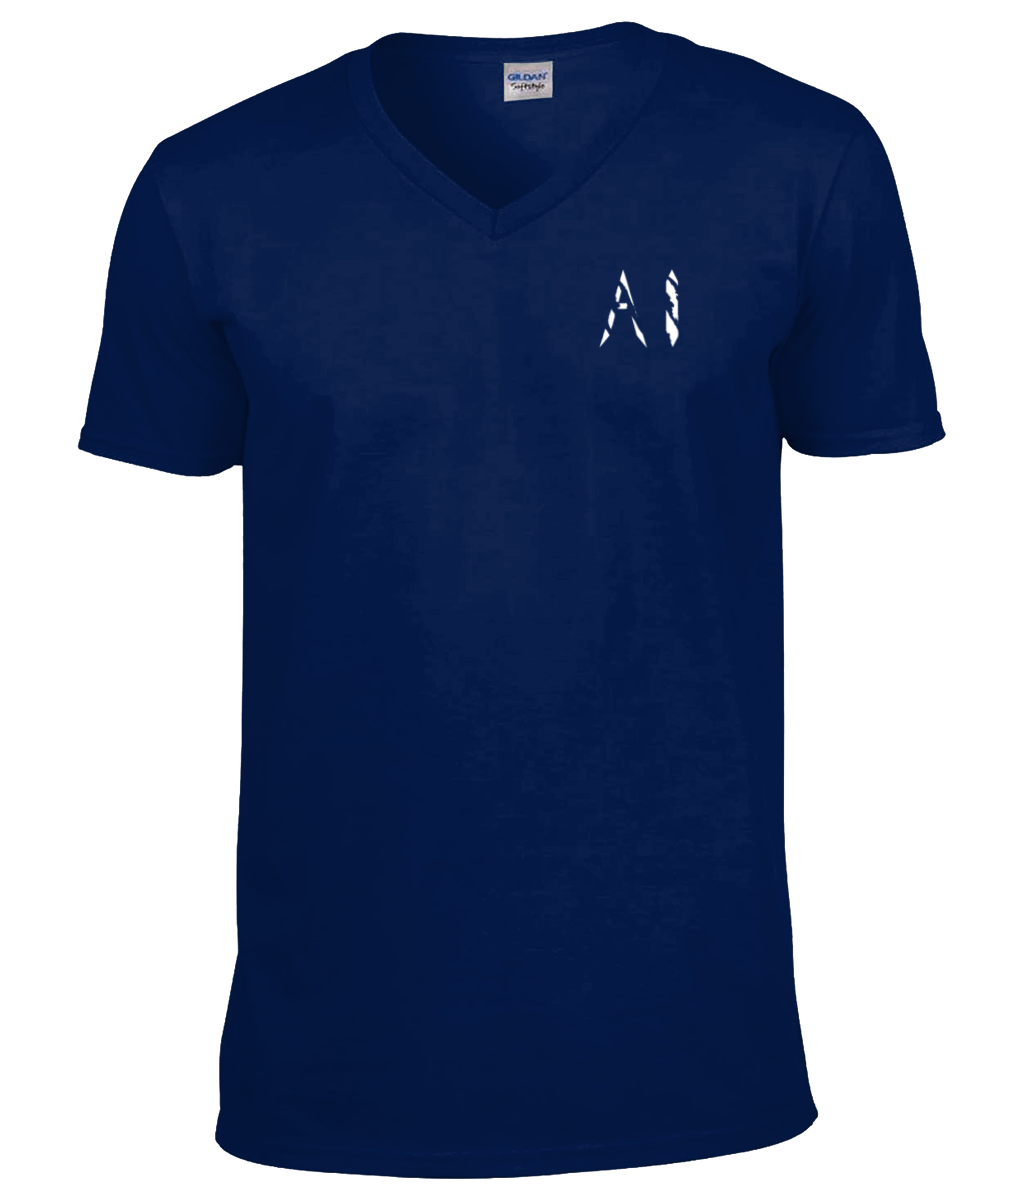 Womens navy blue Classic V Neck T-Shirt with black AI logo on left breast